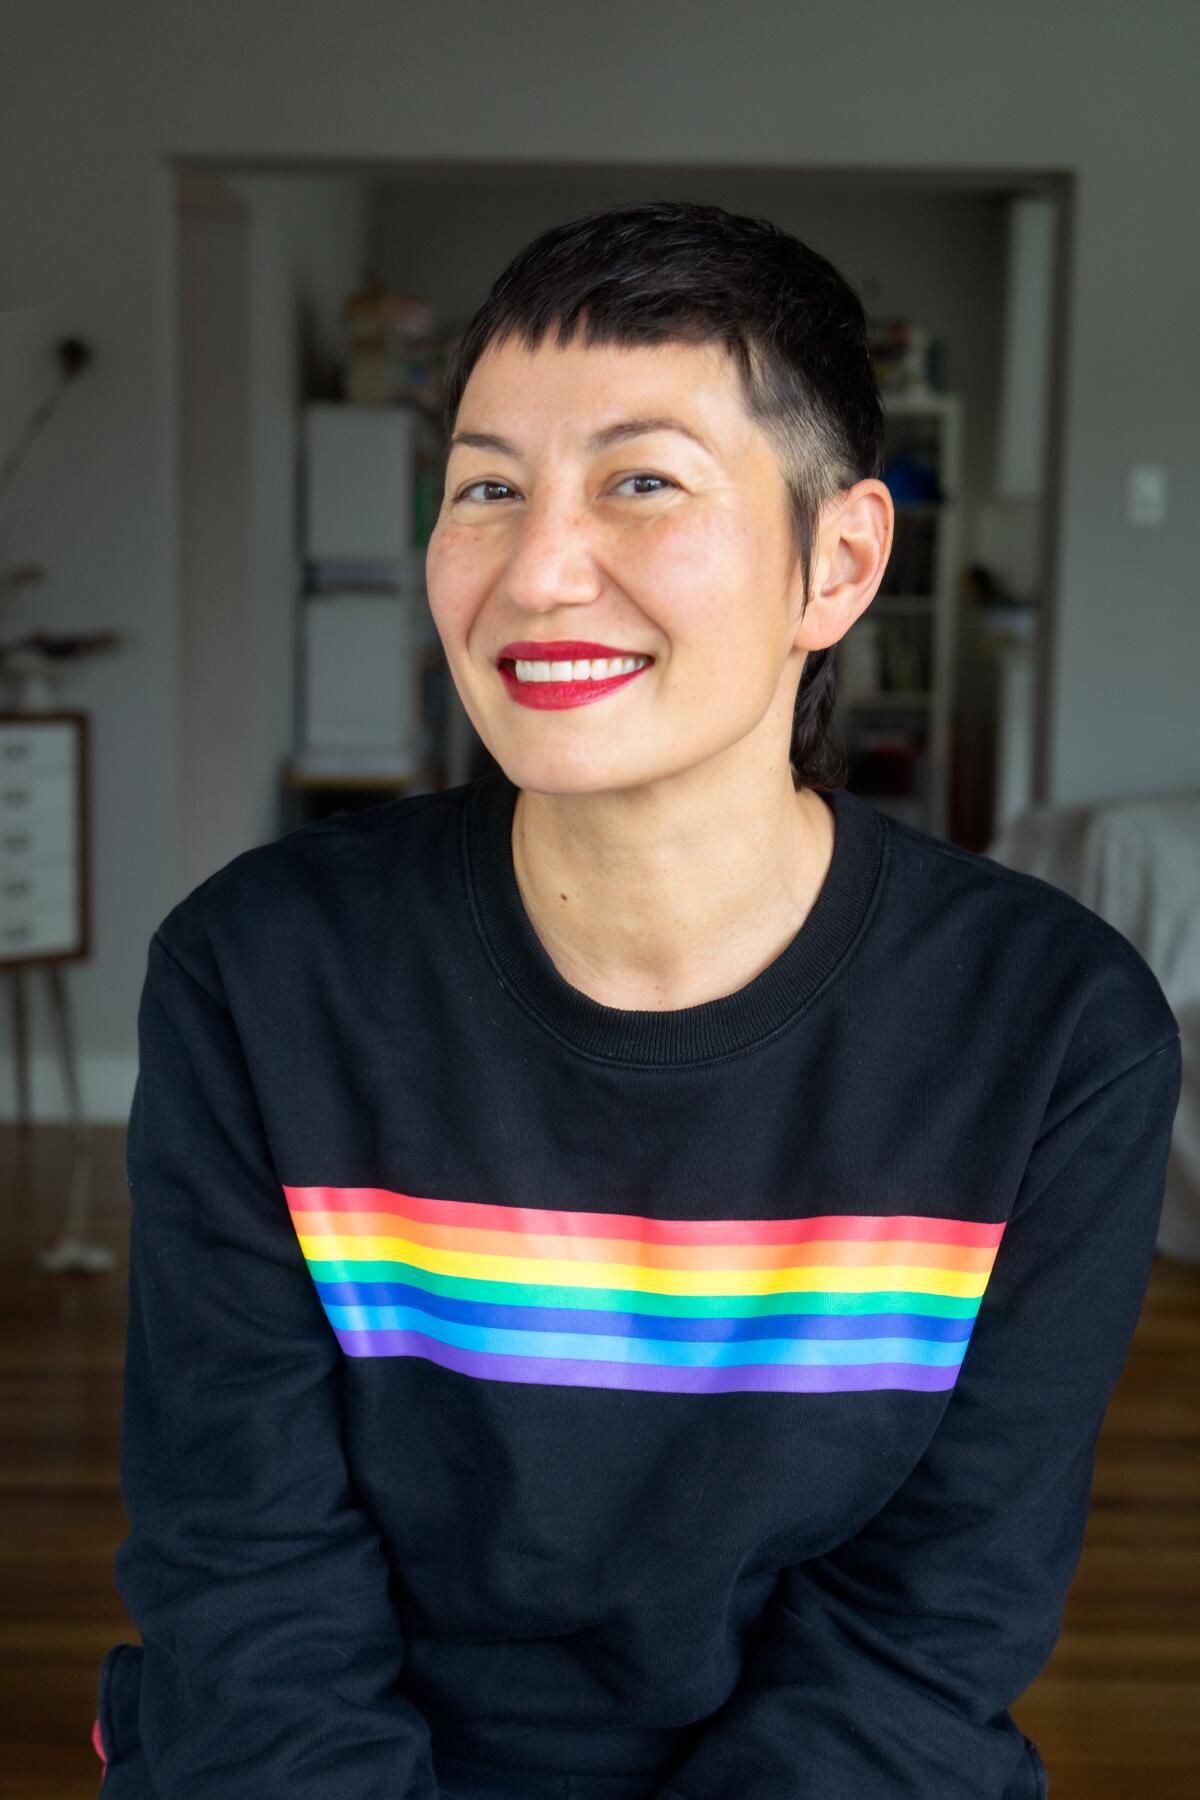 A smiling person wears a black sweatshirt with a rainbow bar across the front of it.